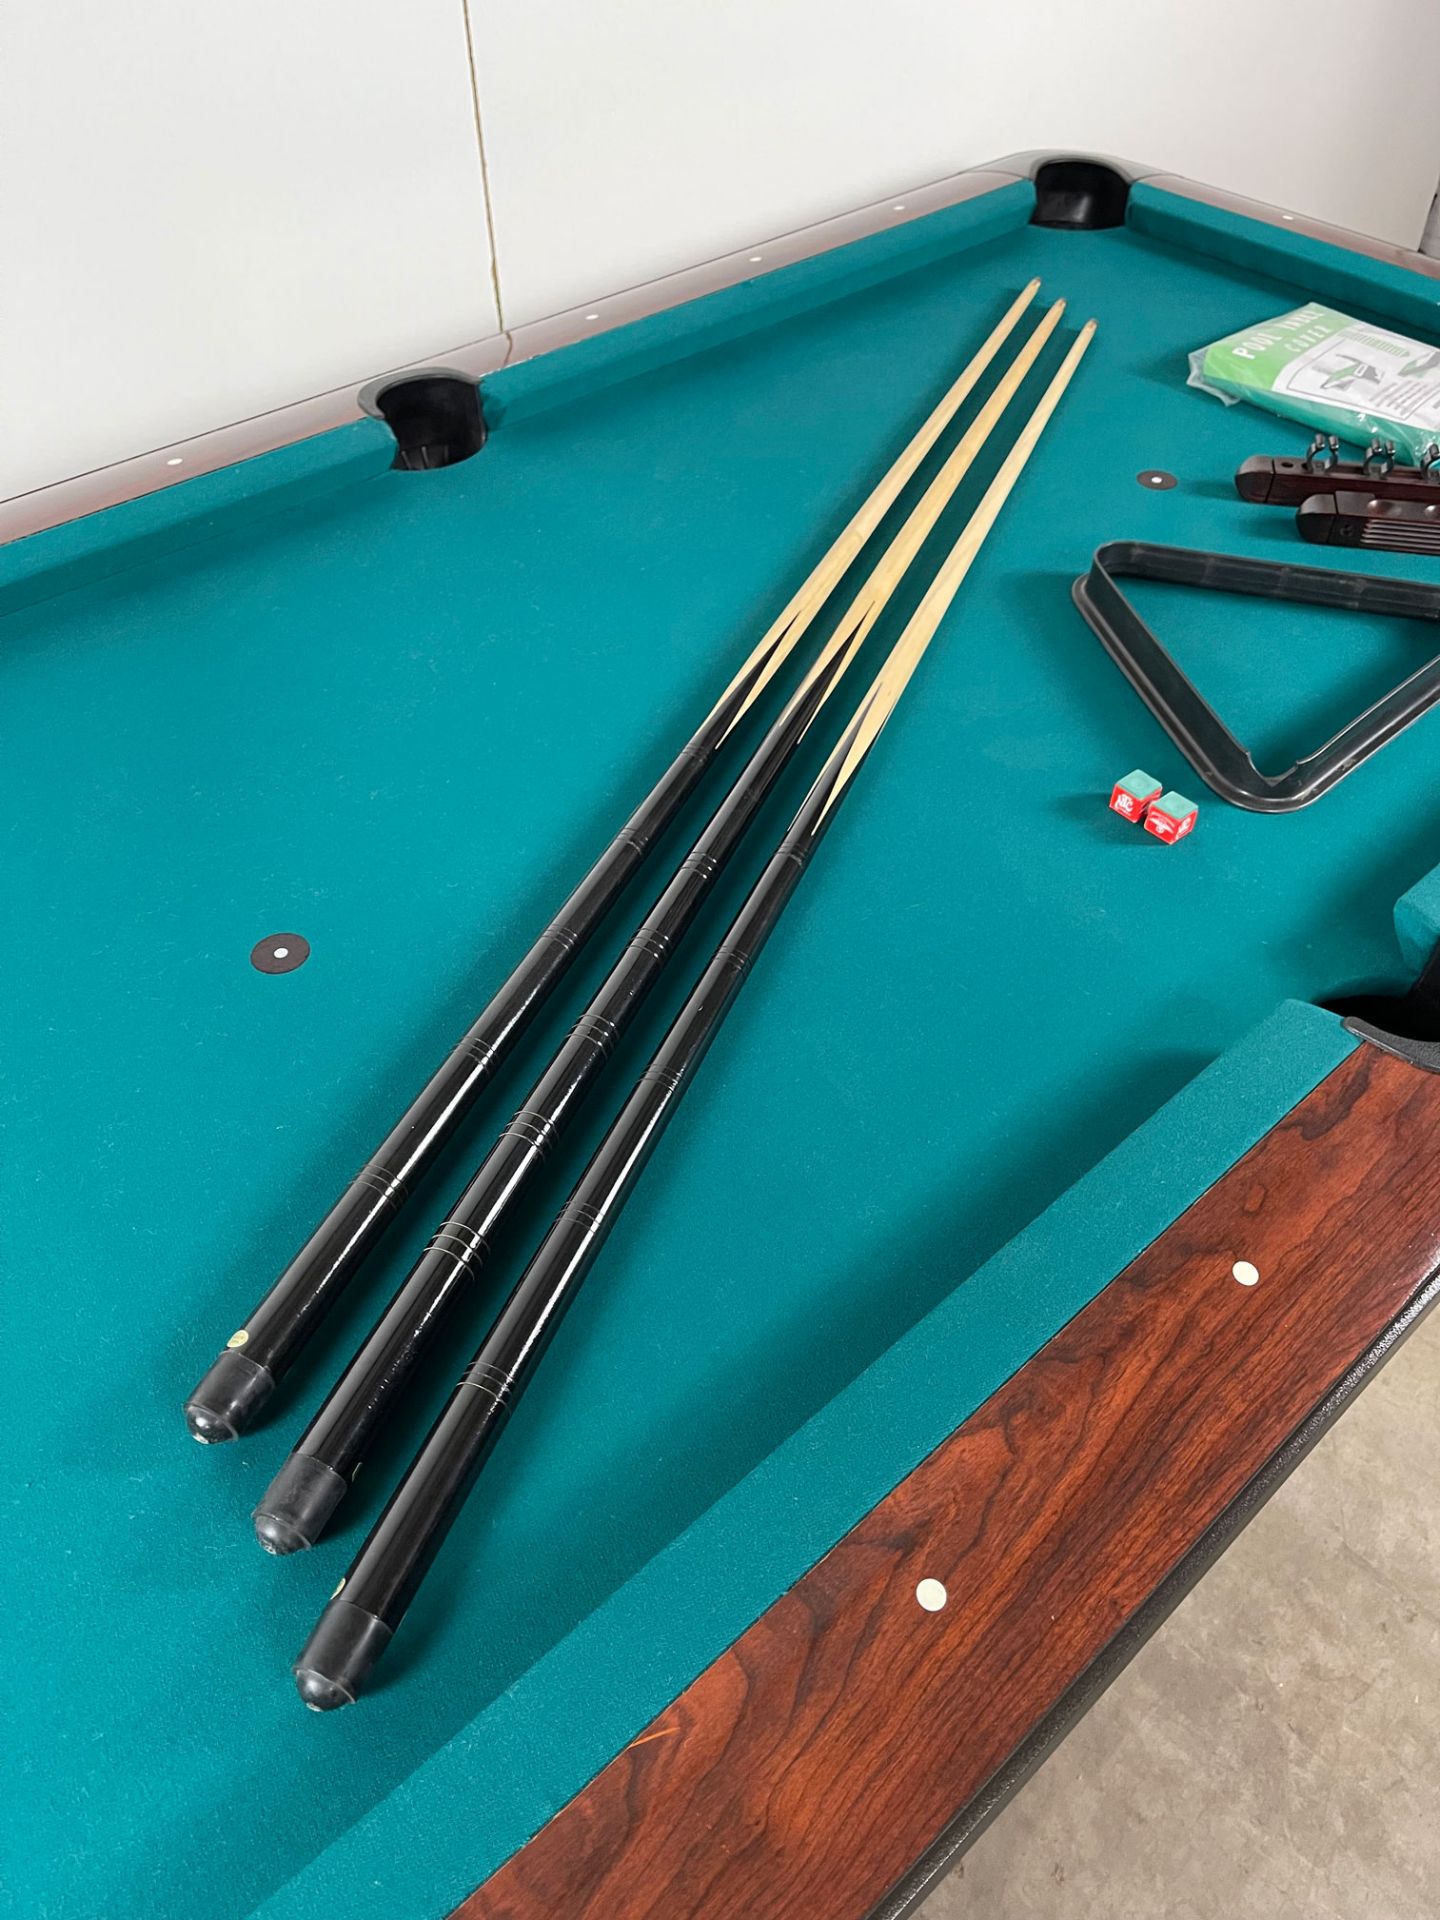 7ft SAM YOWA Coin-Op Billiards Table - Image 11 of 16